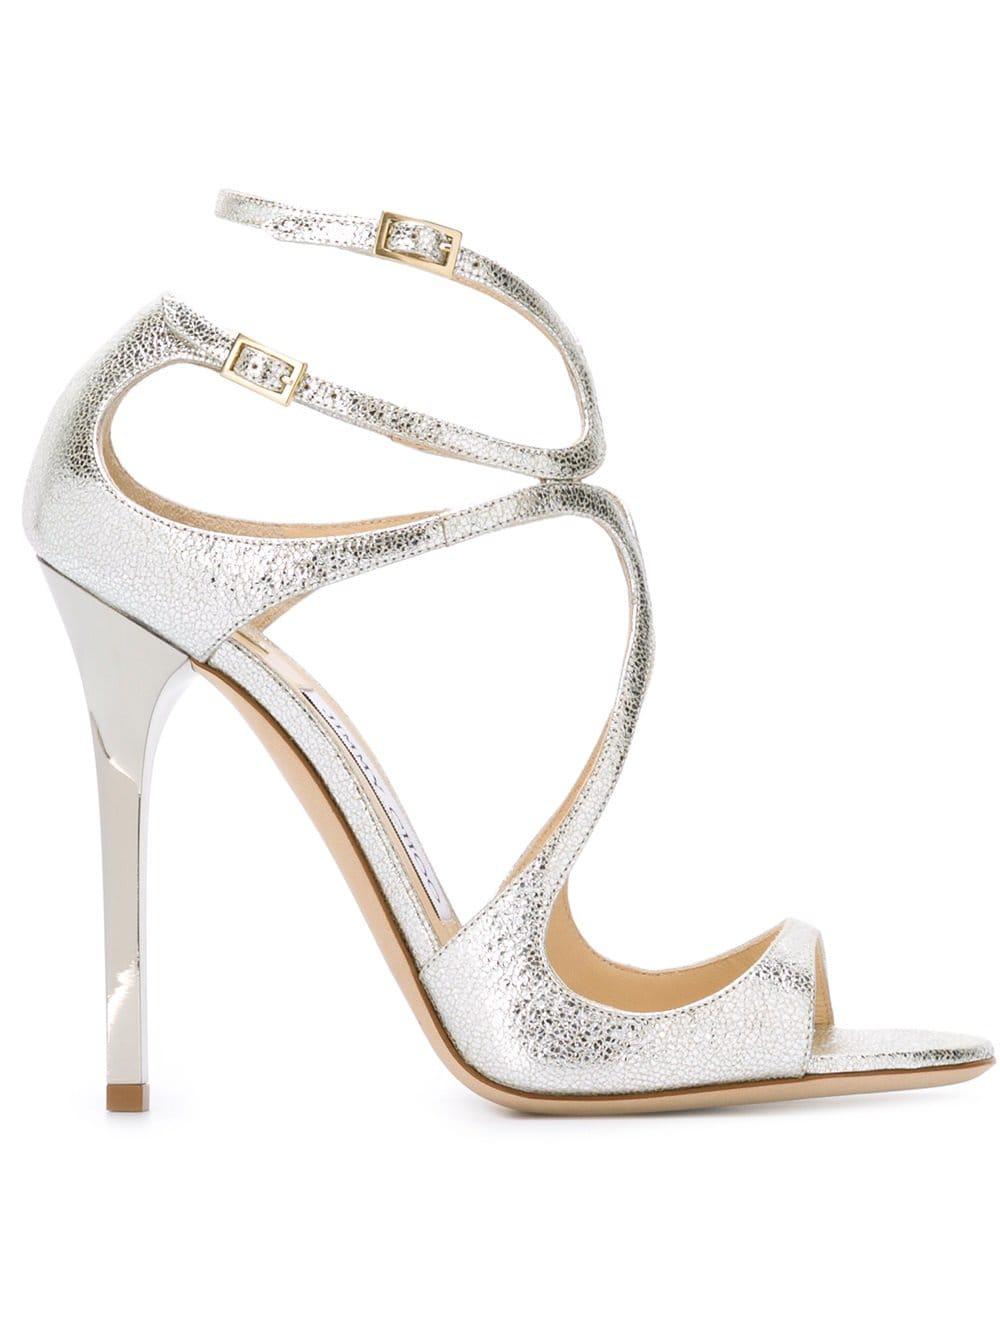 Jimmy Choo Nude Blast Patent Leather Grommet Ankle Strap 